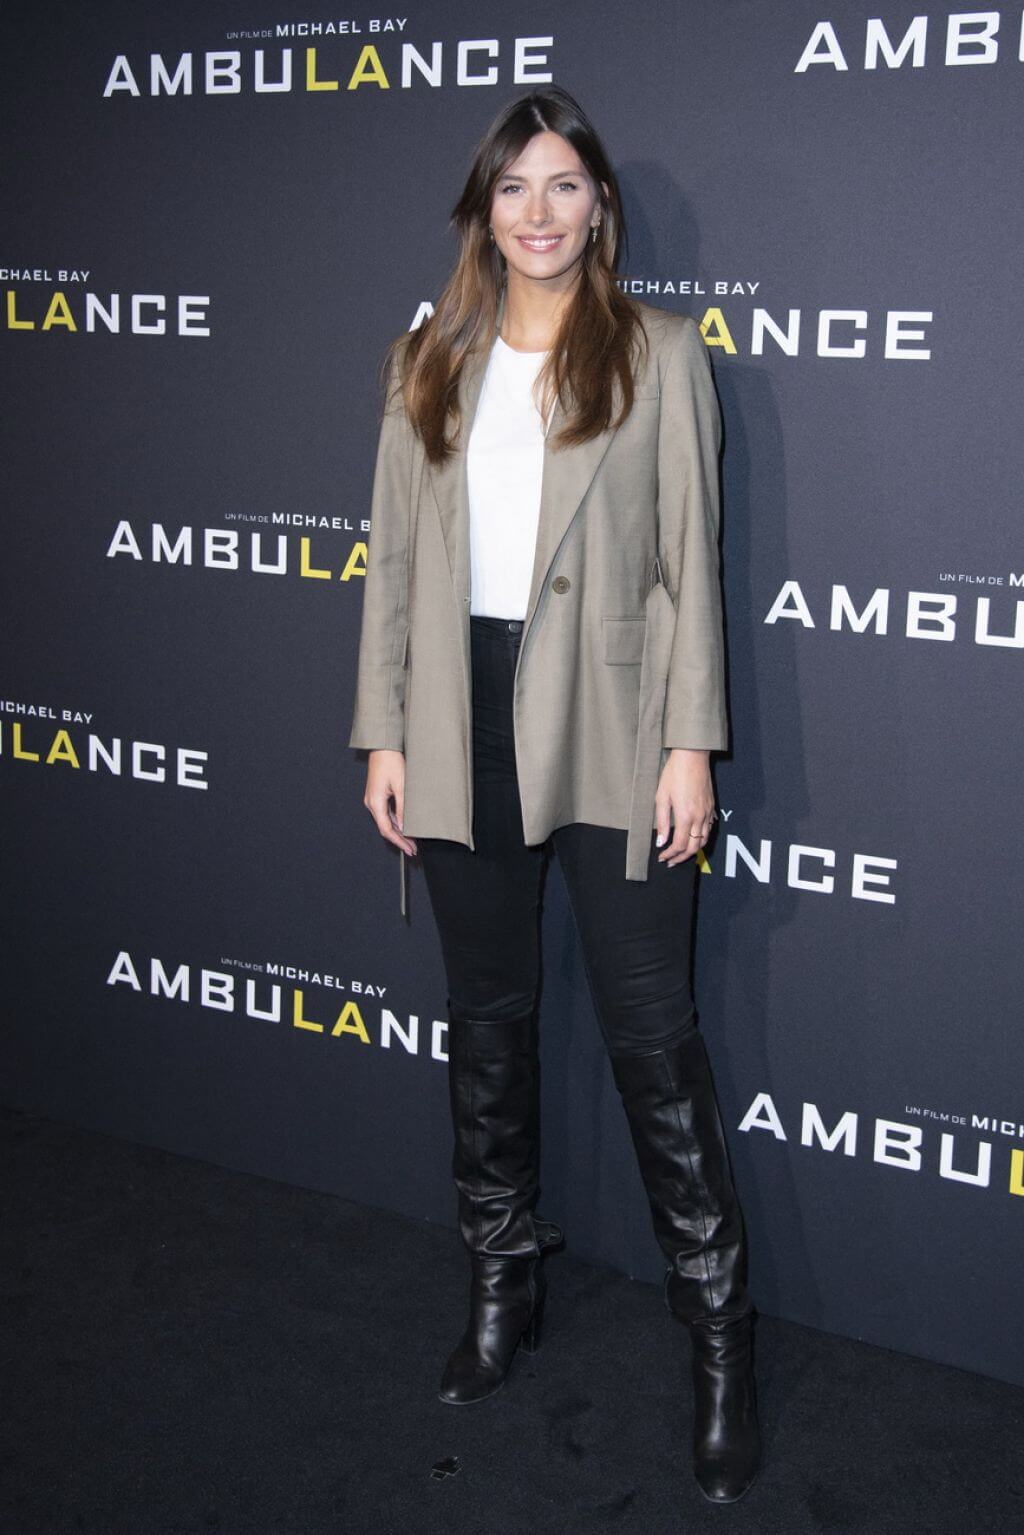 Camille Cerf  In Grey Long Blazer Under White Top With Black Jeans At “Ambulance” Premiere in Paris